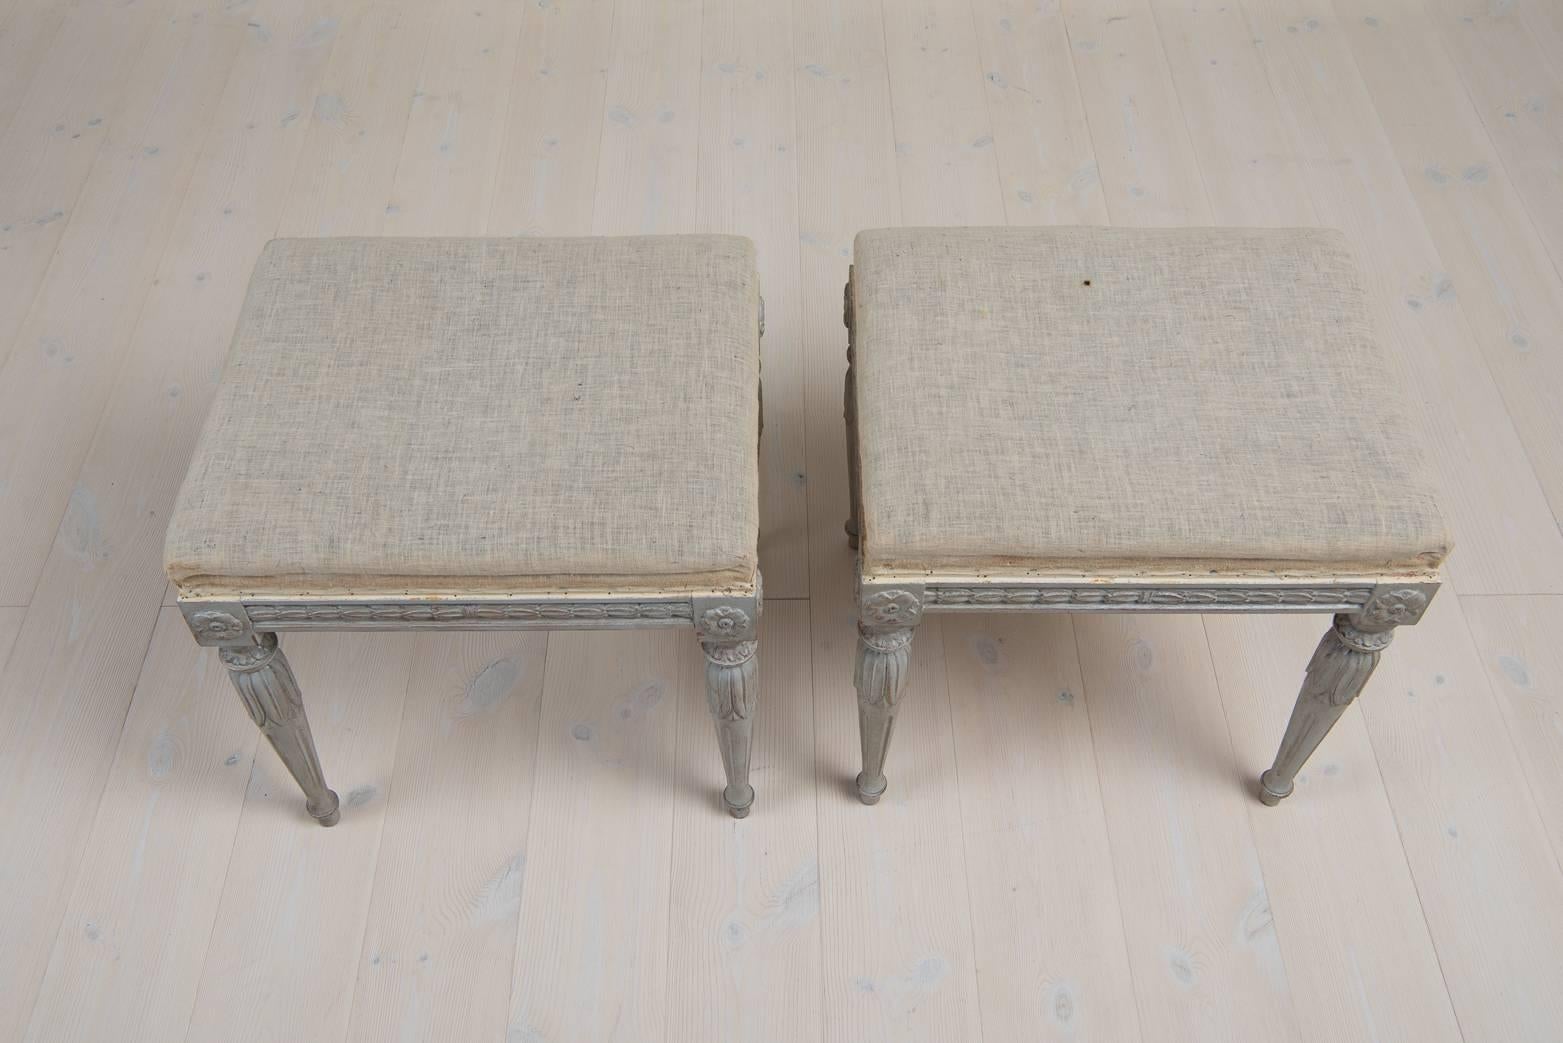 Two Gustavian style stools. The stools are richly decorated with Gustavian period elements. All decorations are carved in wood. Early 20th century, Sweden.